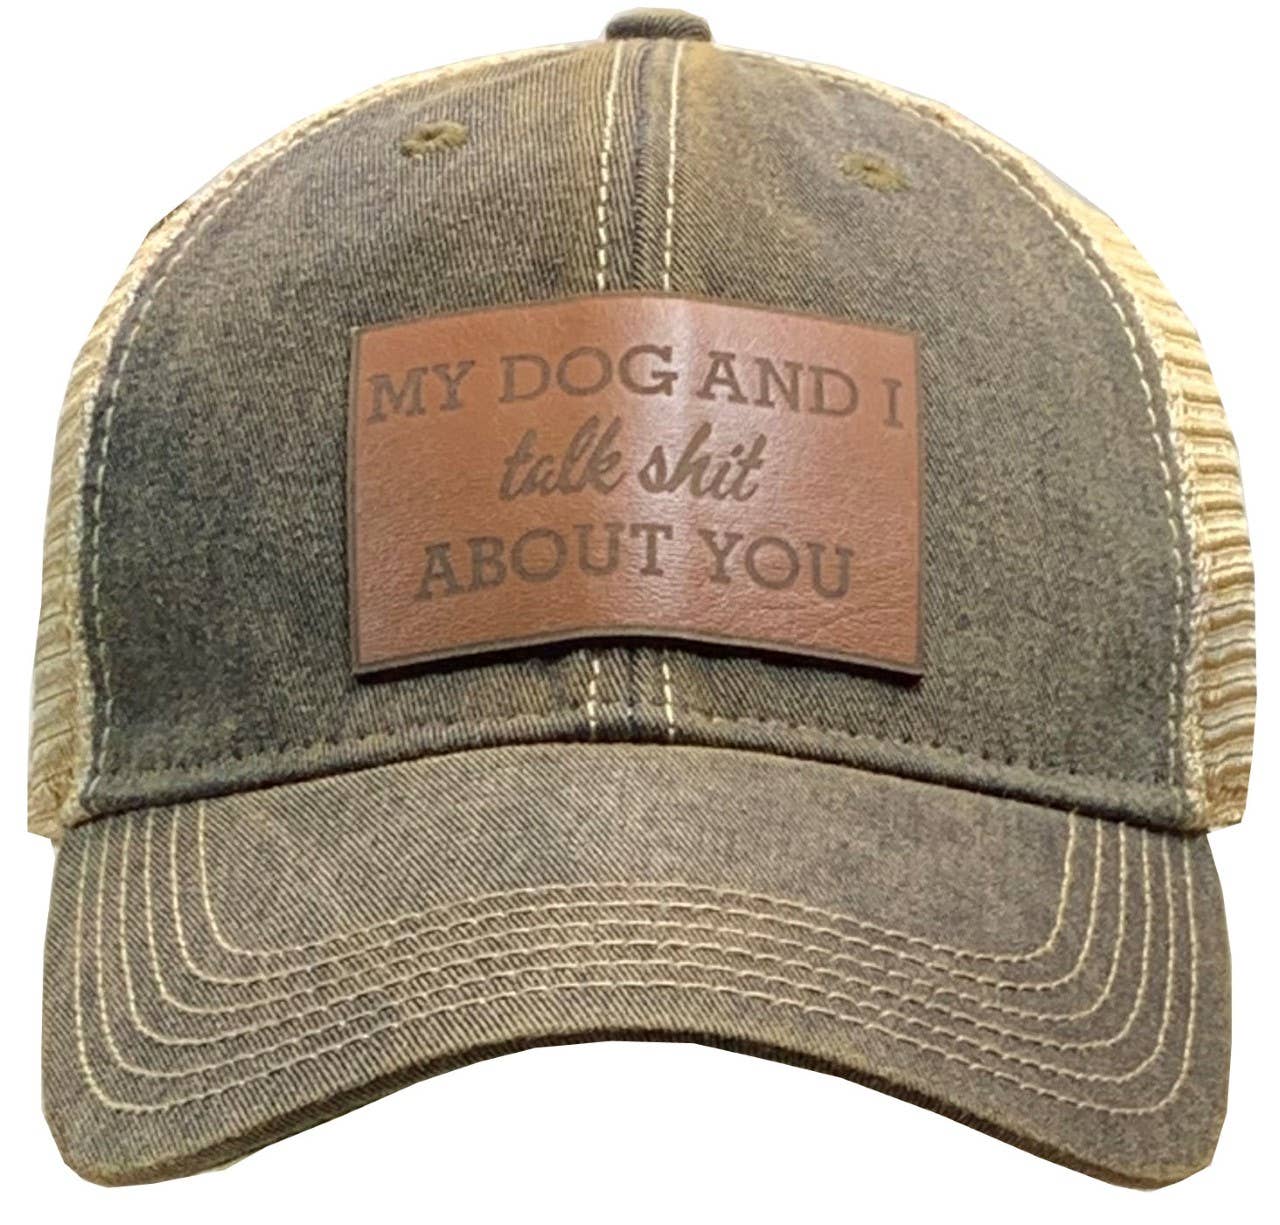 "My Dog And I Talk Shit.."Trucker Cap Genuine Leather Patch